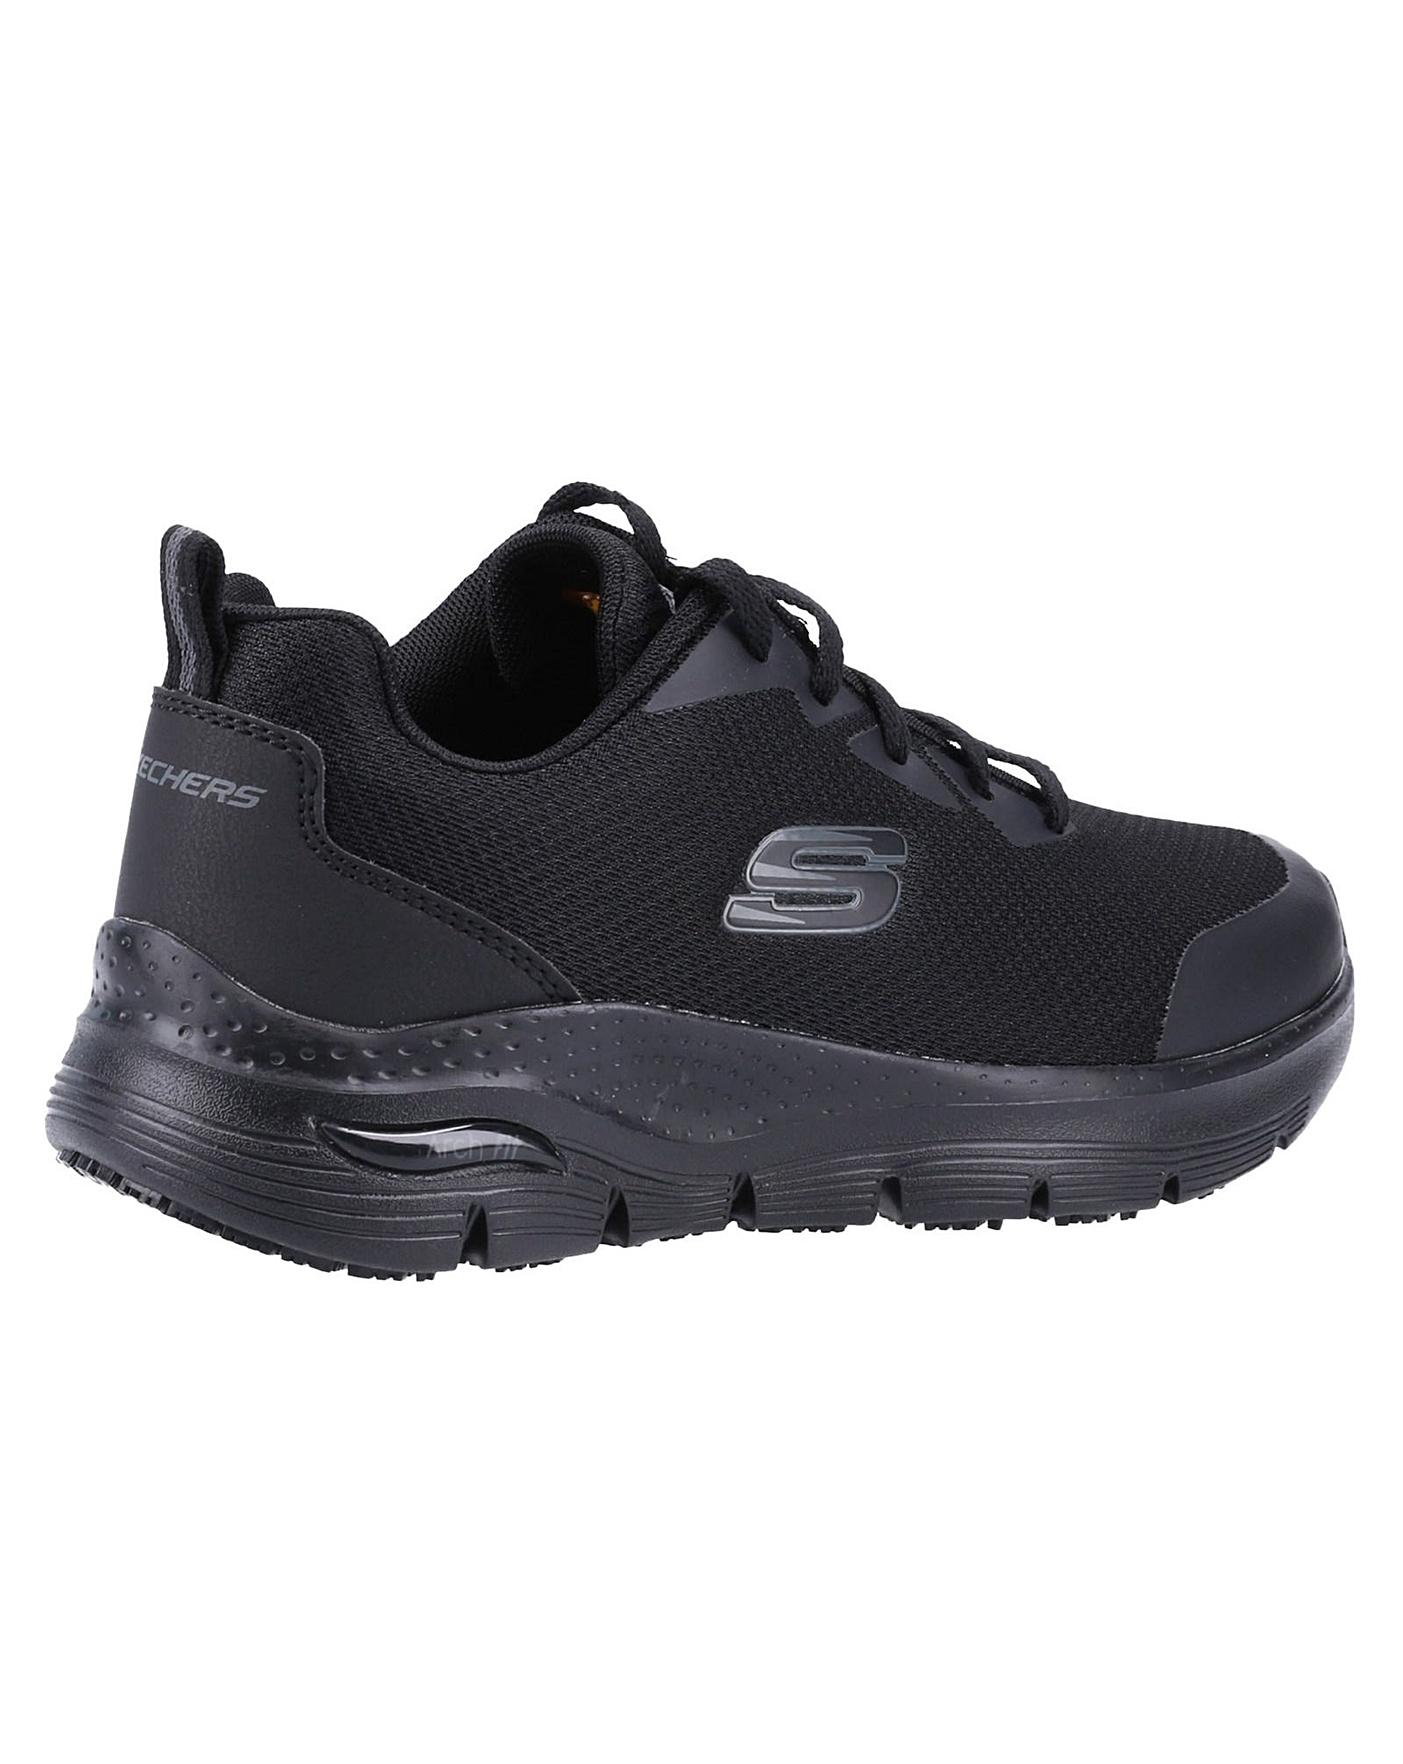 Skechers Arch Fit Sr Occupational Shoes | Oxendales